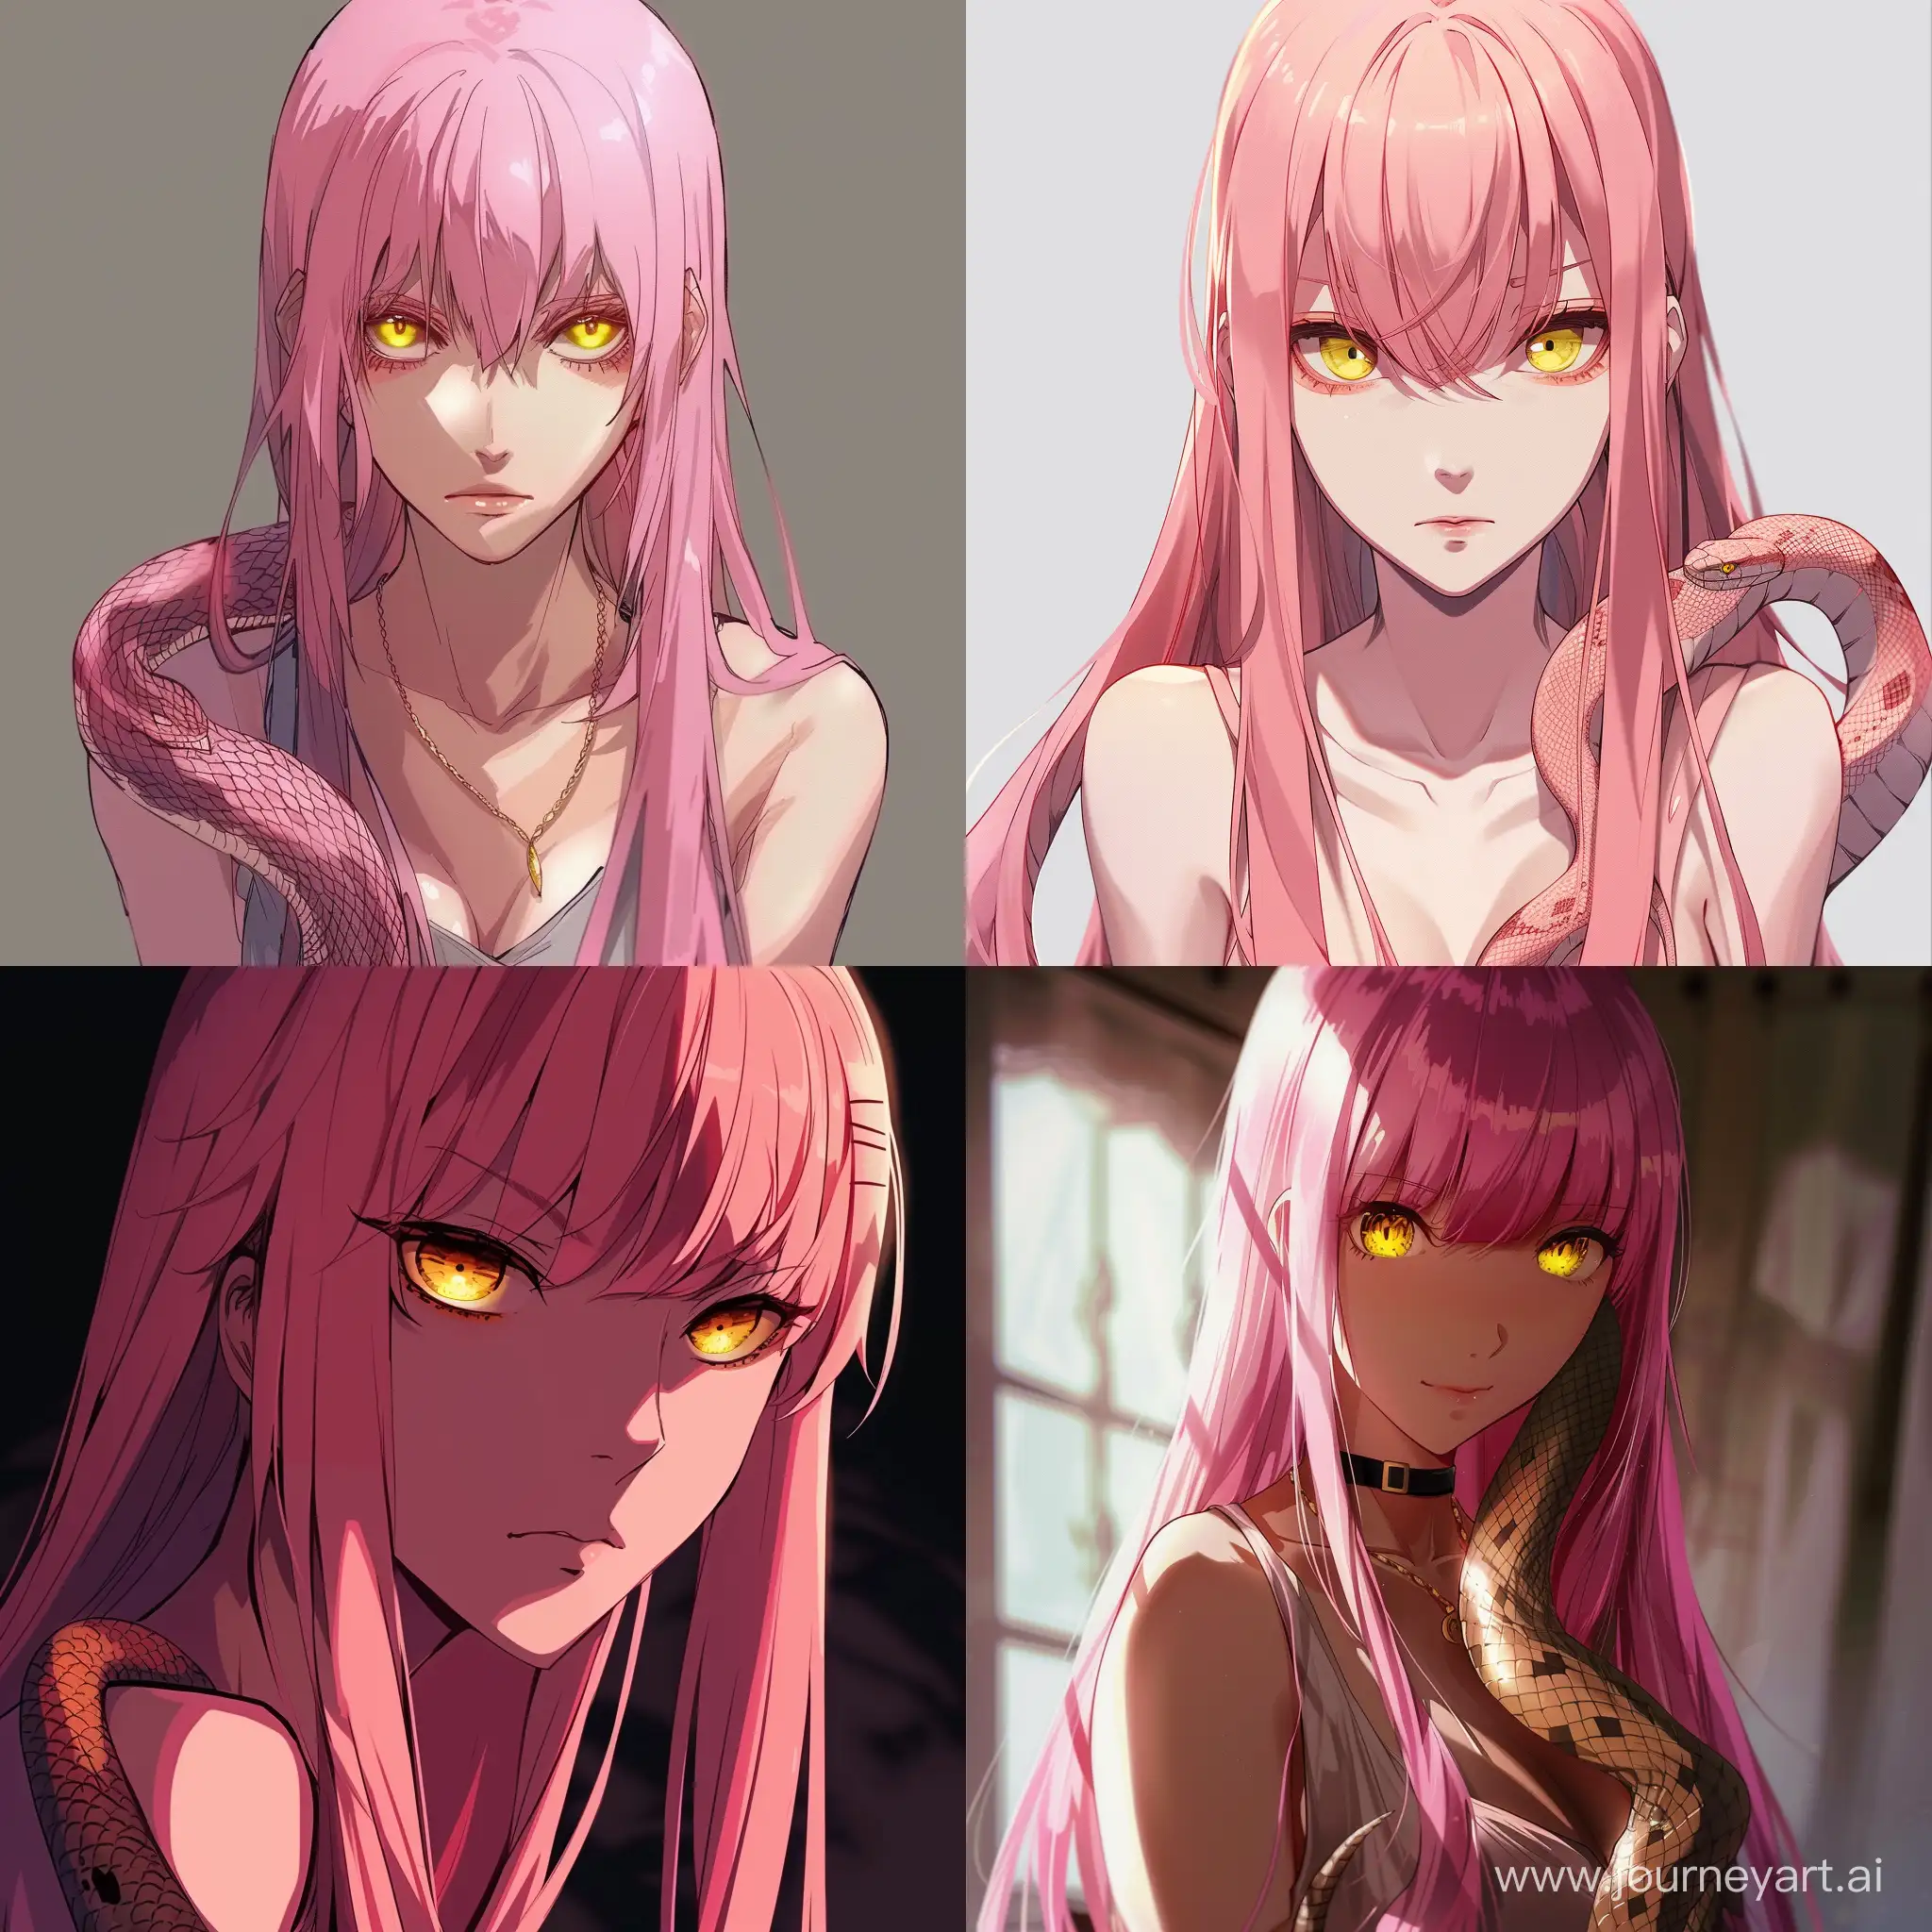 Snake girl with pink long straight hair and yellow eyes in anime style